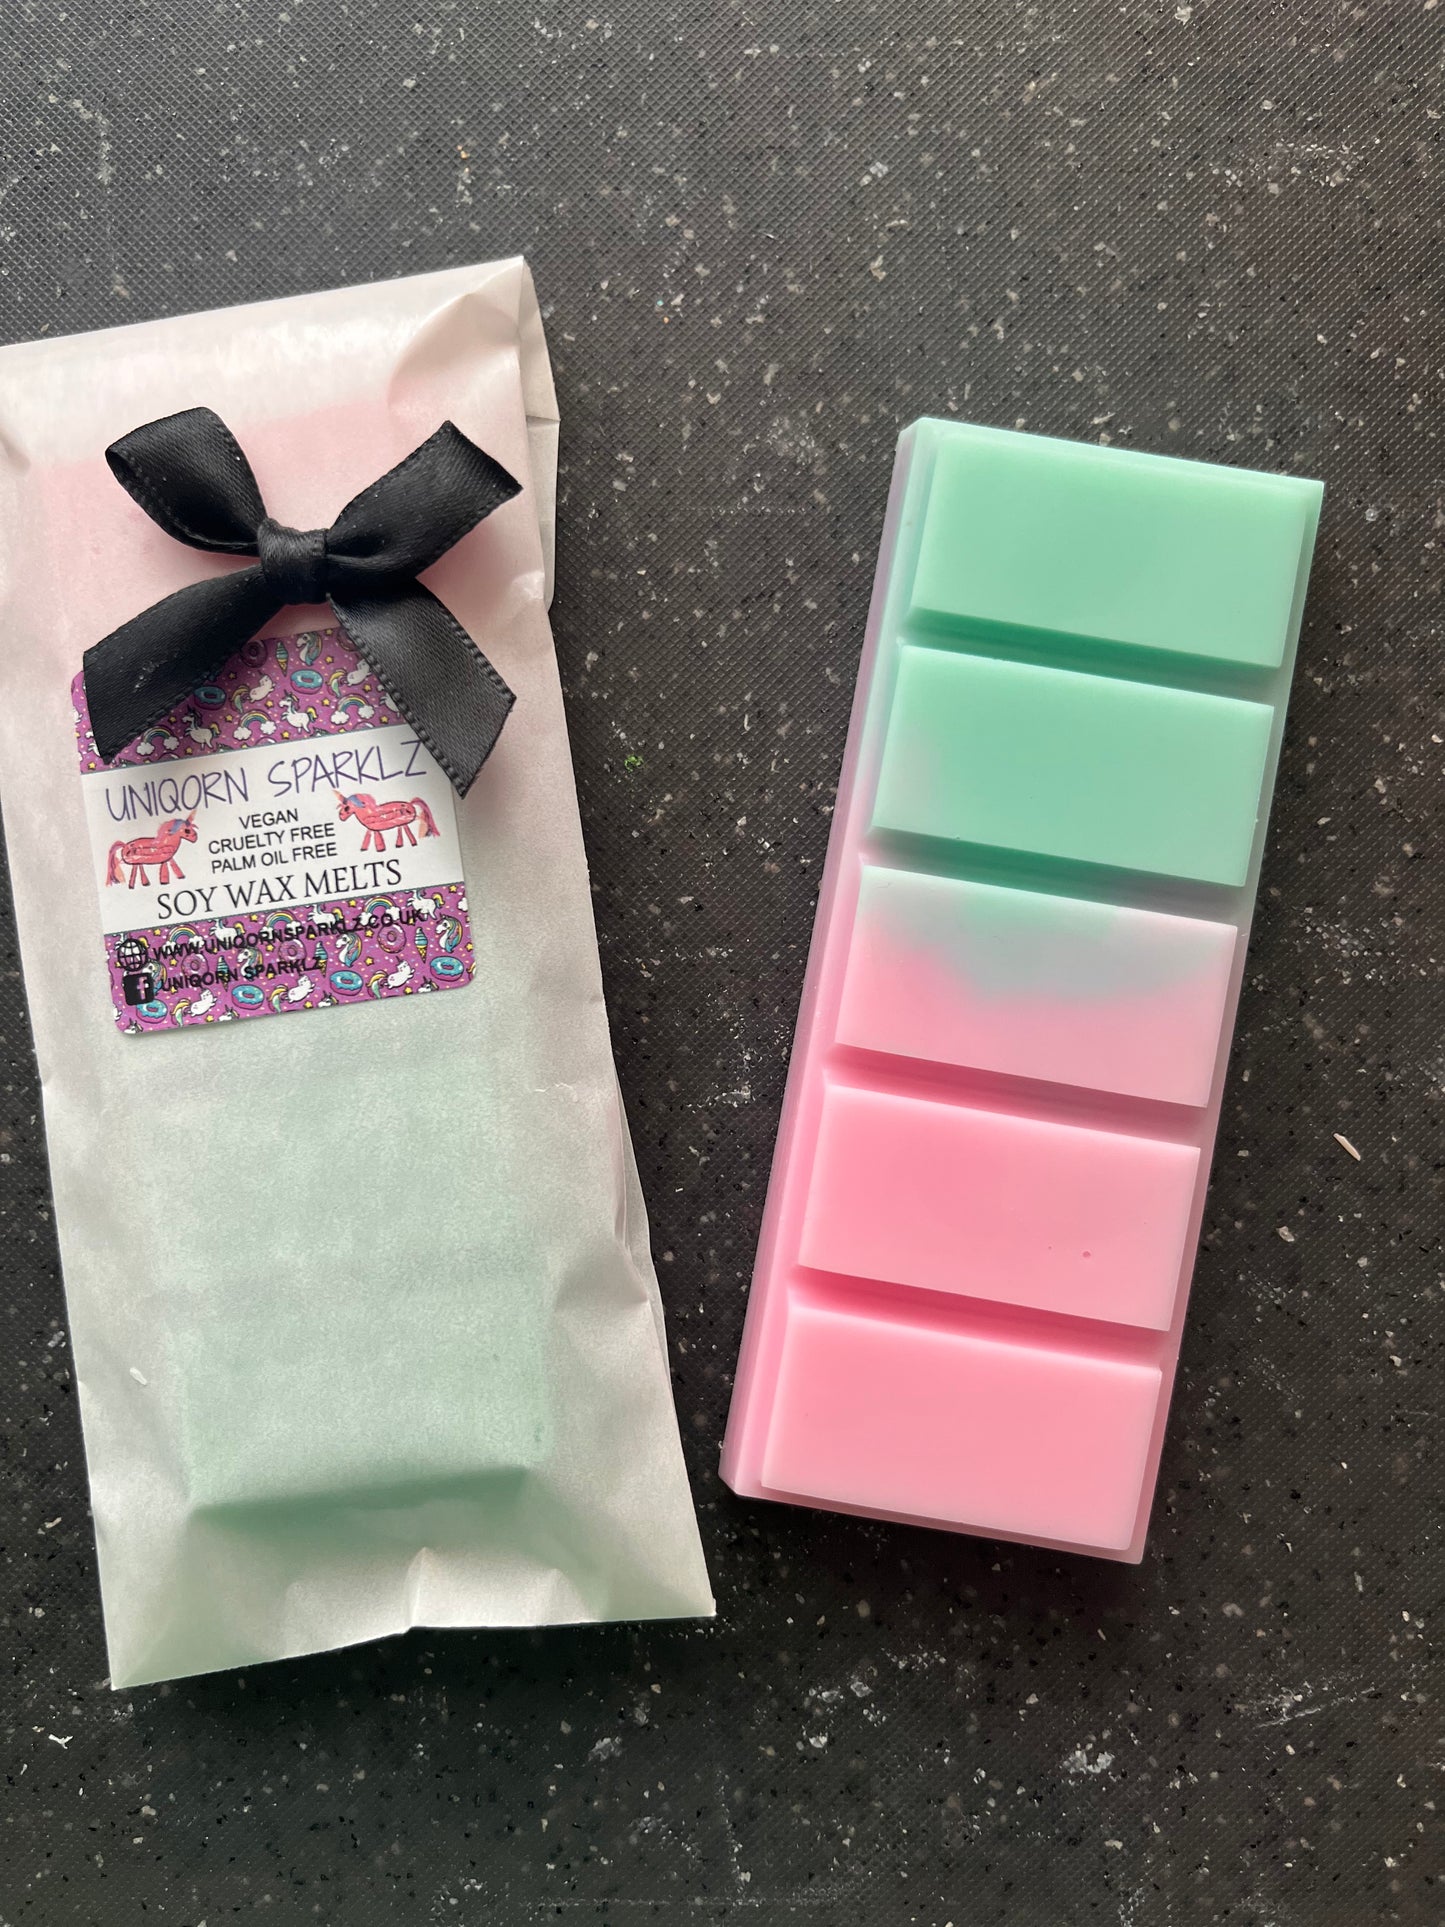 Clean and fresh wax melts